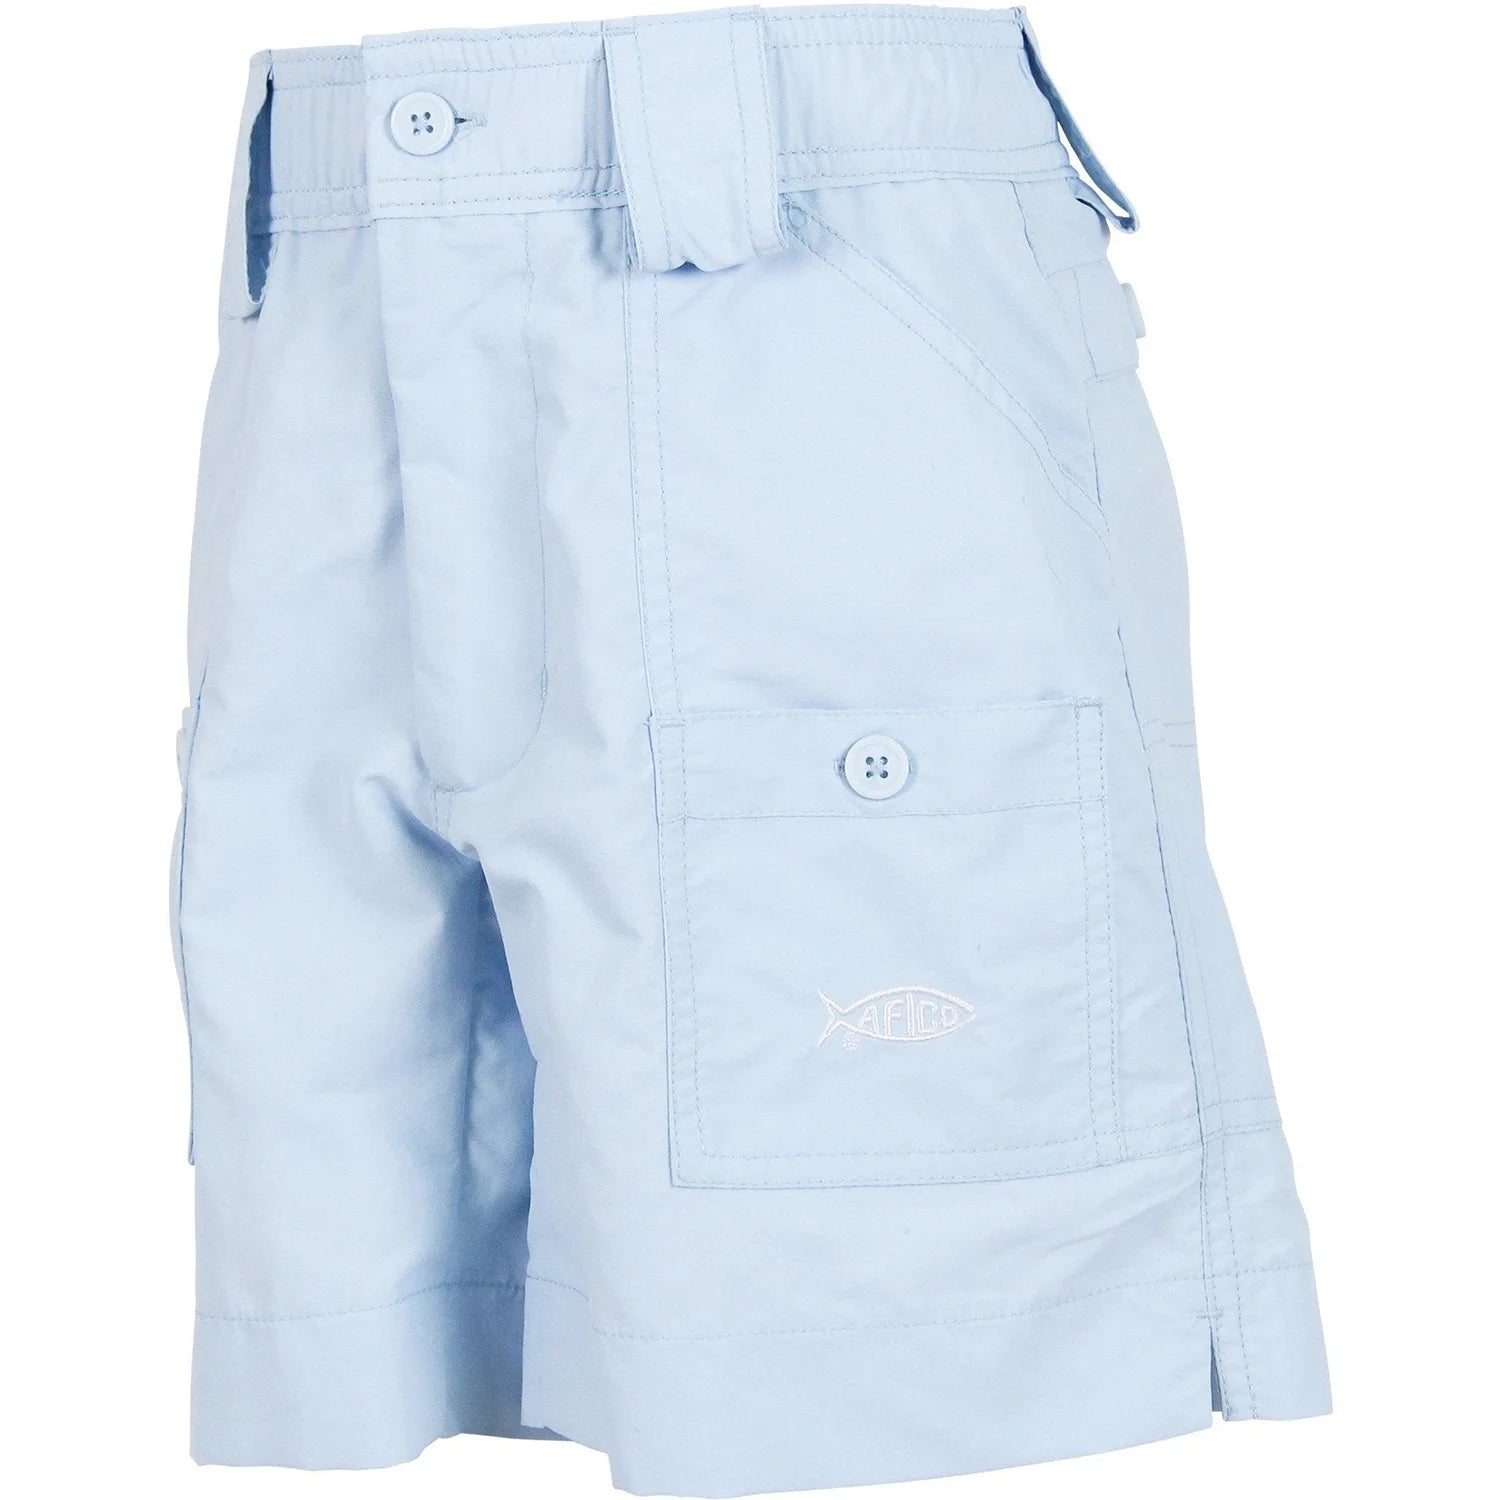 AFTCO Youth Fishing Shorts (6 colors) – The Shirt Shop